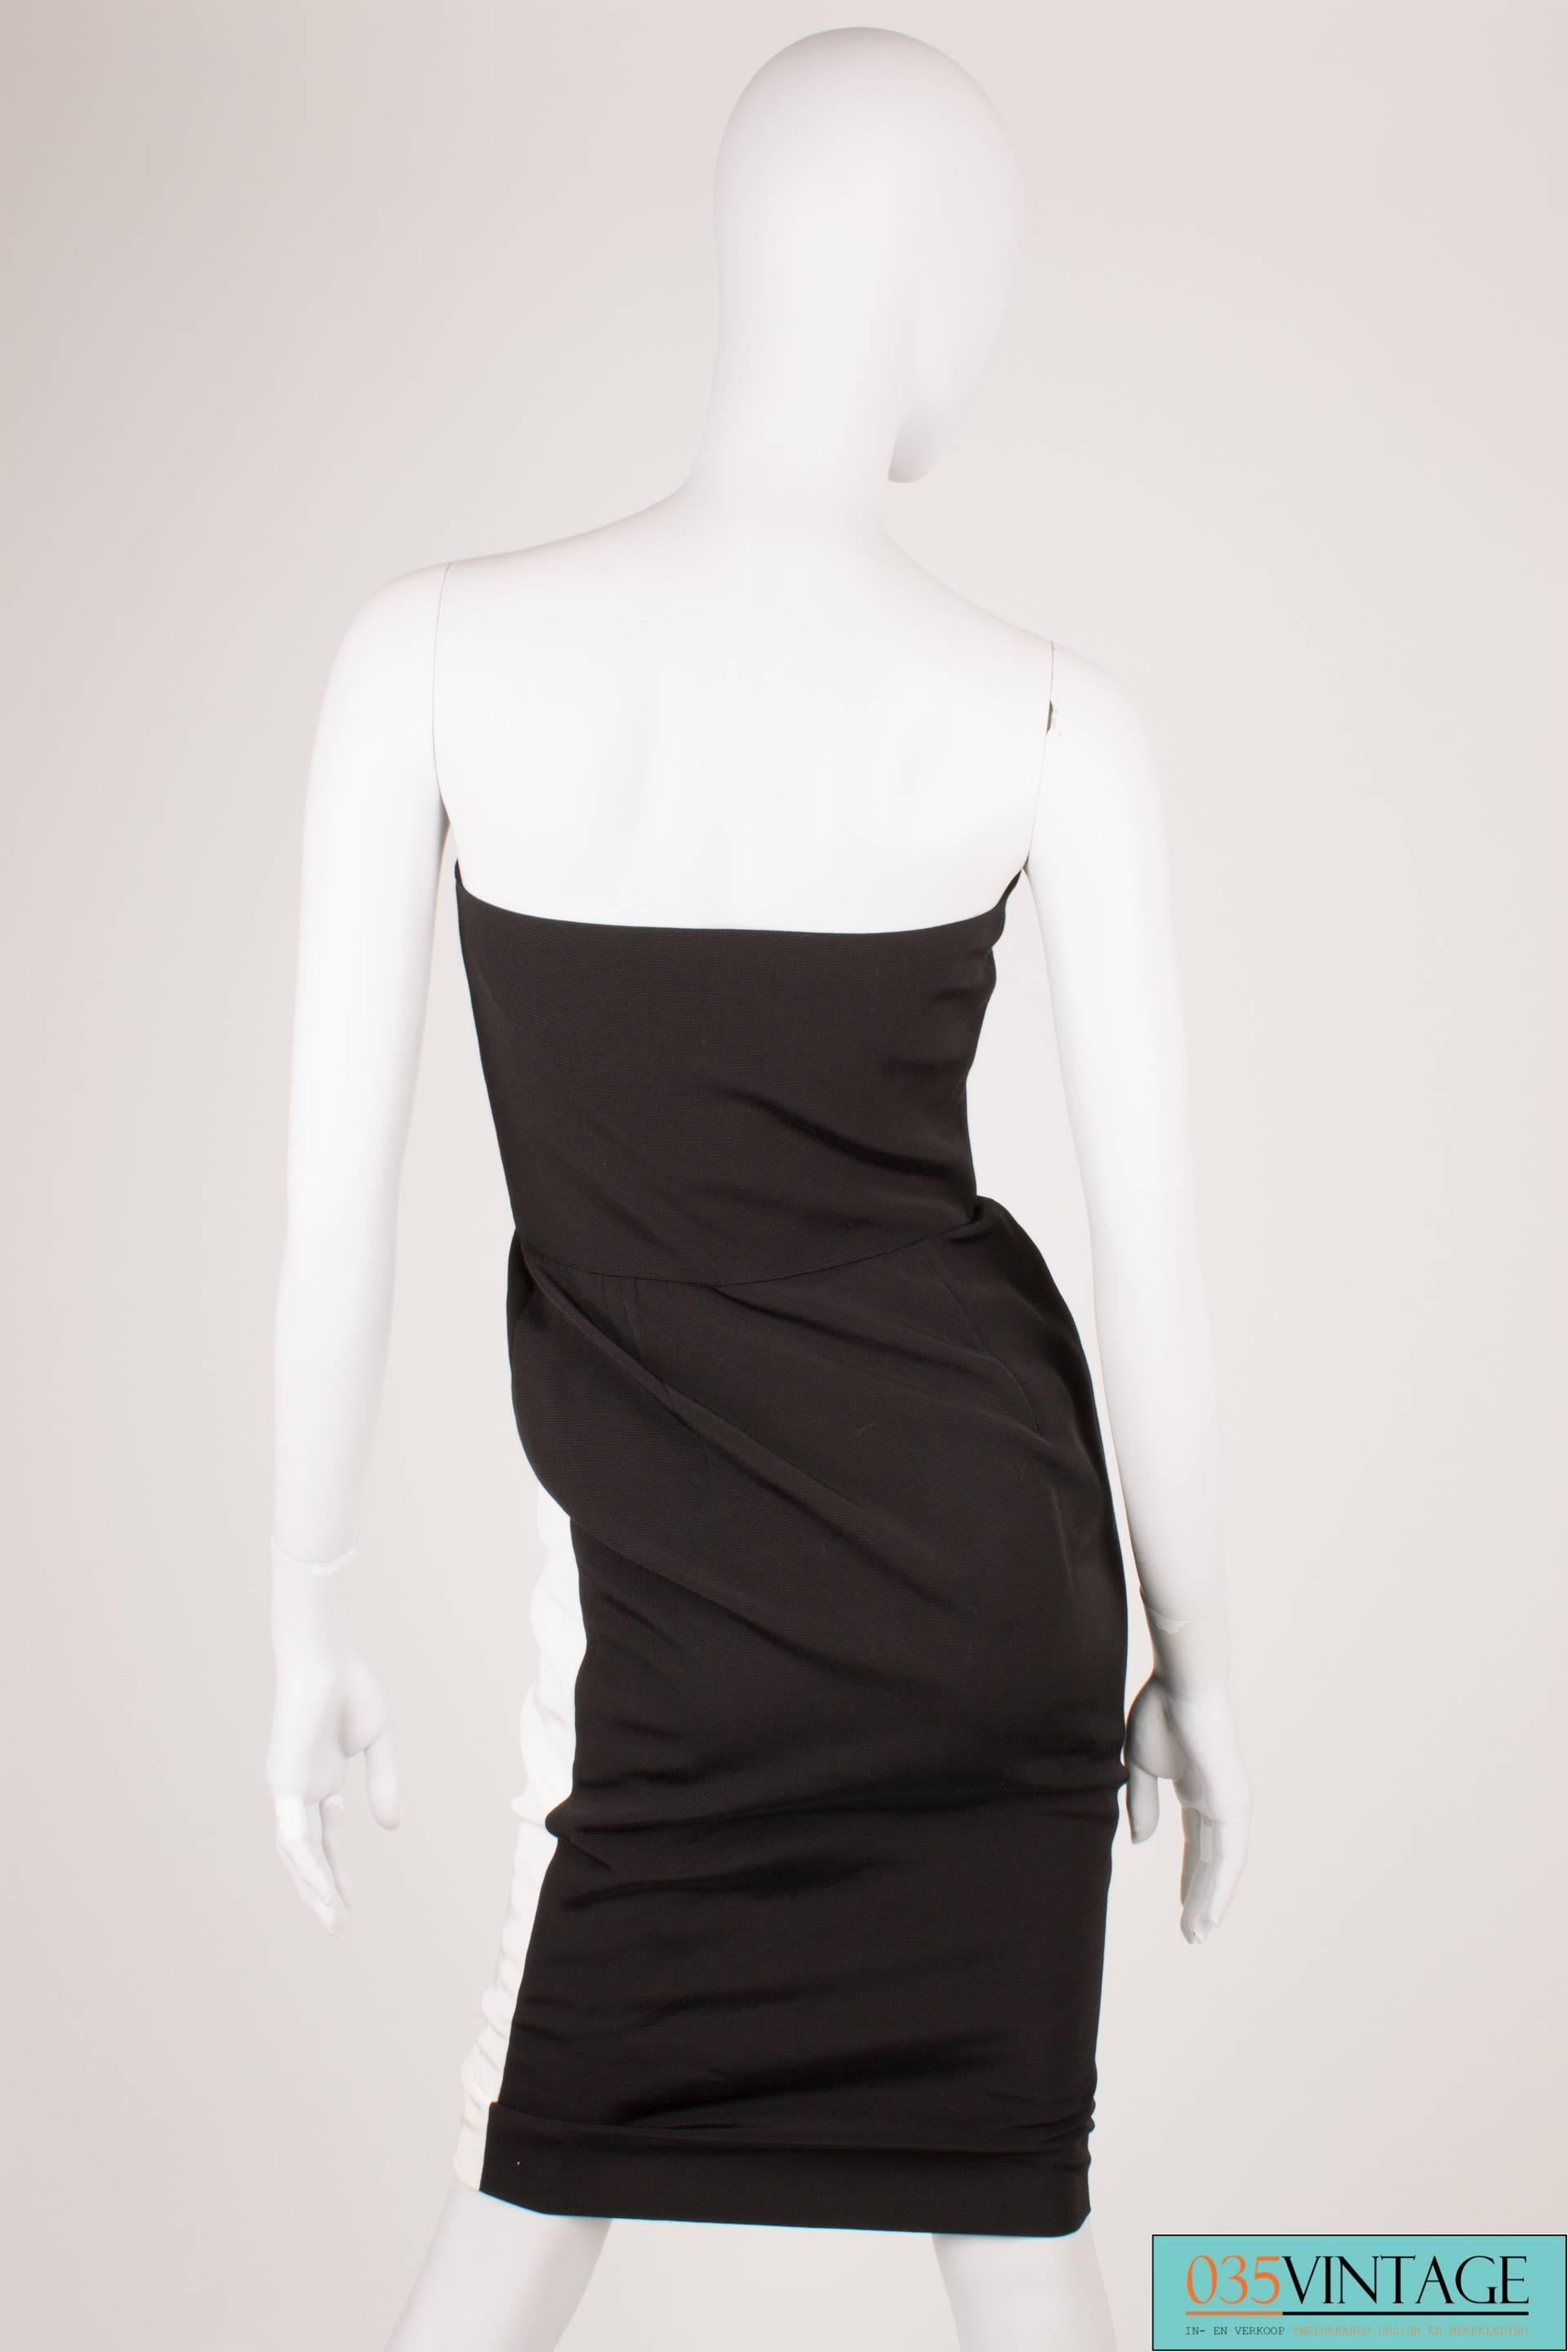 Beautiful 80's vintage dress by Lanvin in black and white, adorable!

This strapless dress has front zip closure which is hidden underneath the white part whit the black buttons. You have to unloose these buttons, before you can put it on. Very